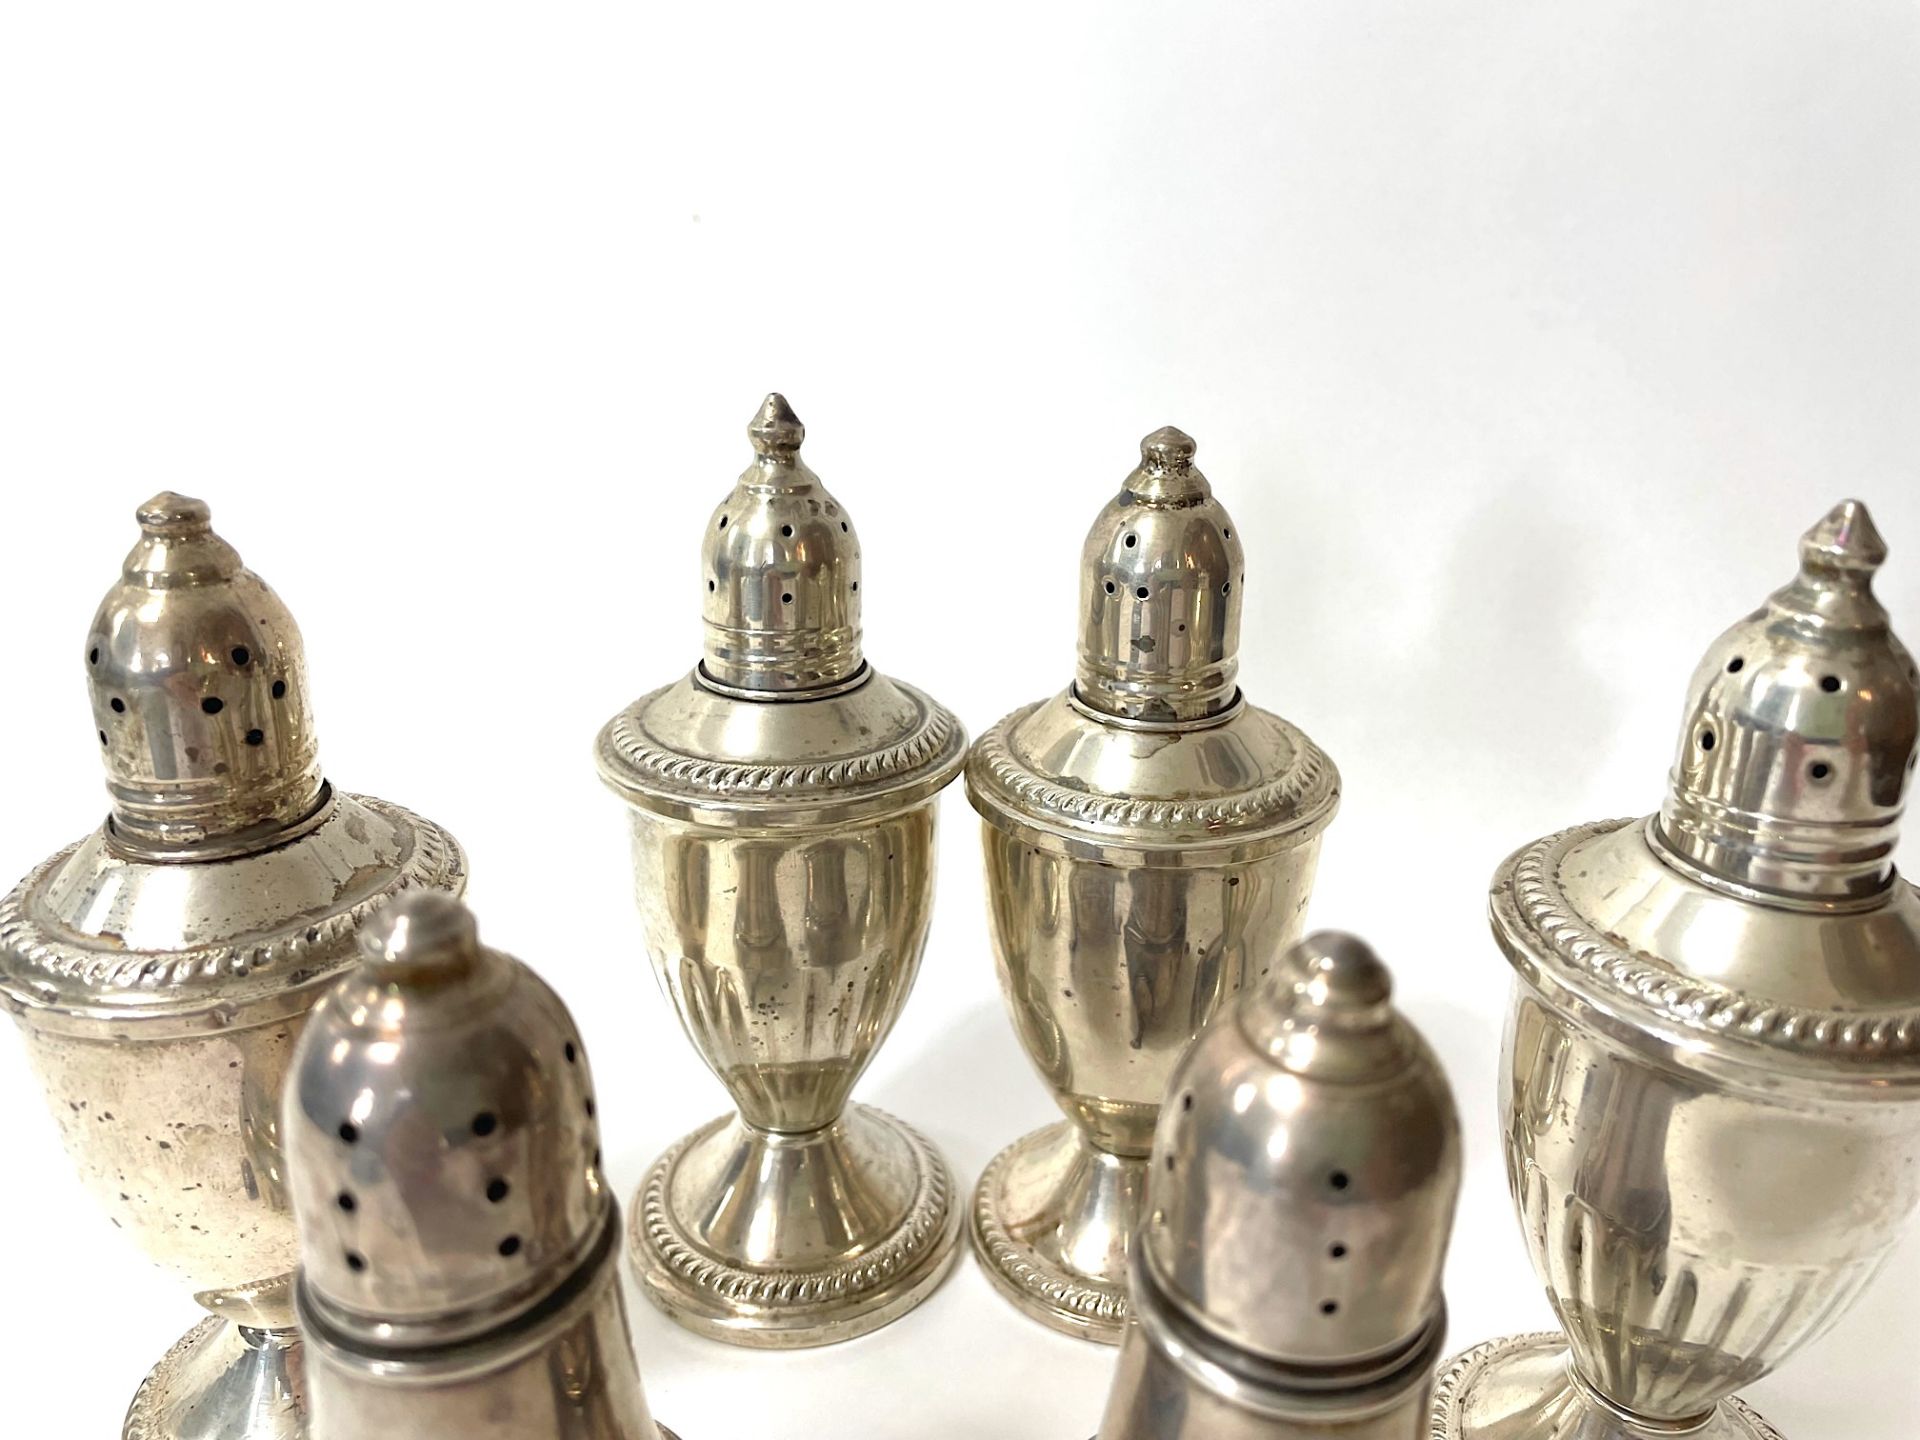 40 pairs of salt/pepper and spice shakers, - Image 81 of 88